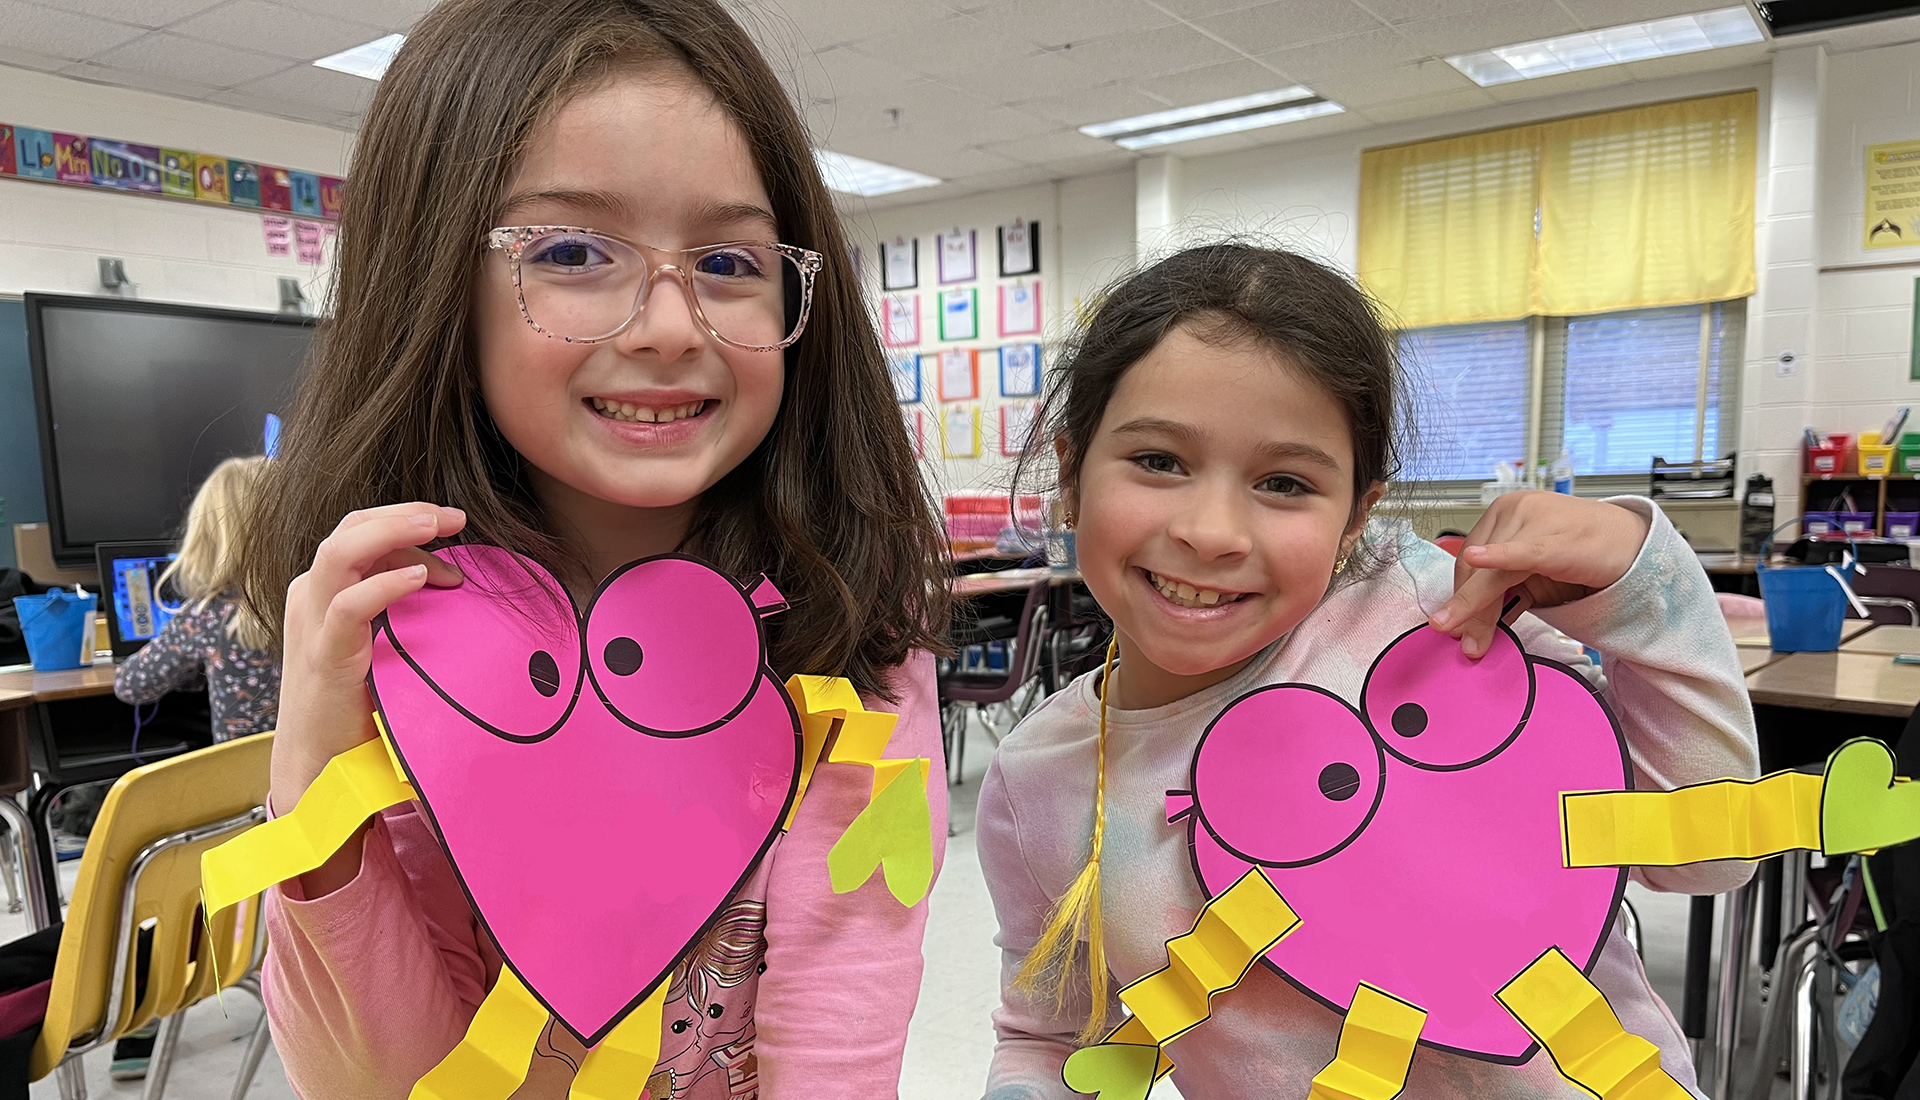 Two young girls holding up a heart shape project they made.